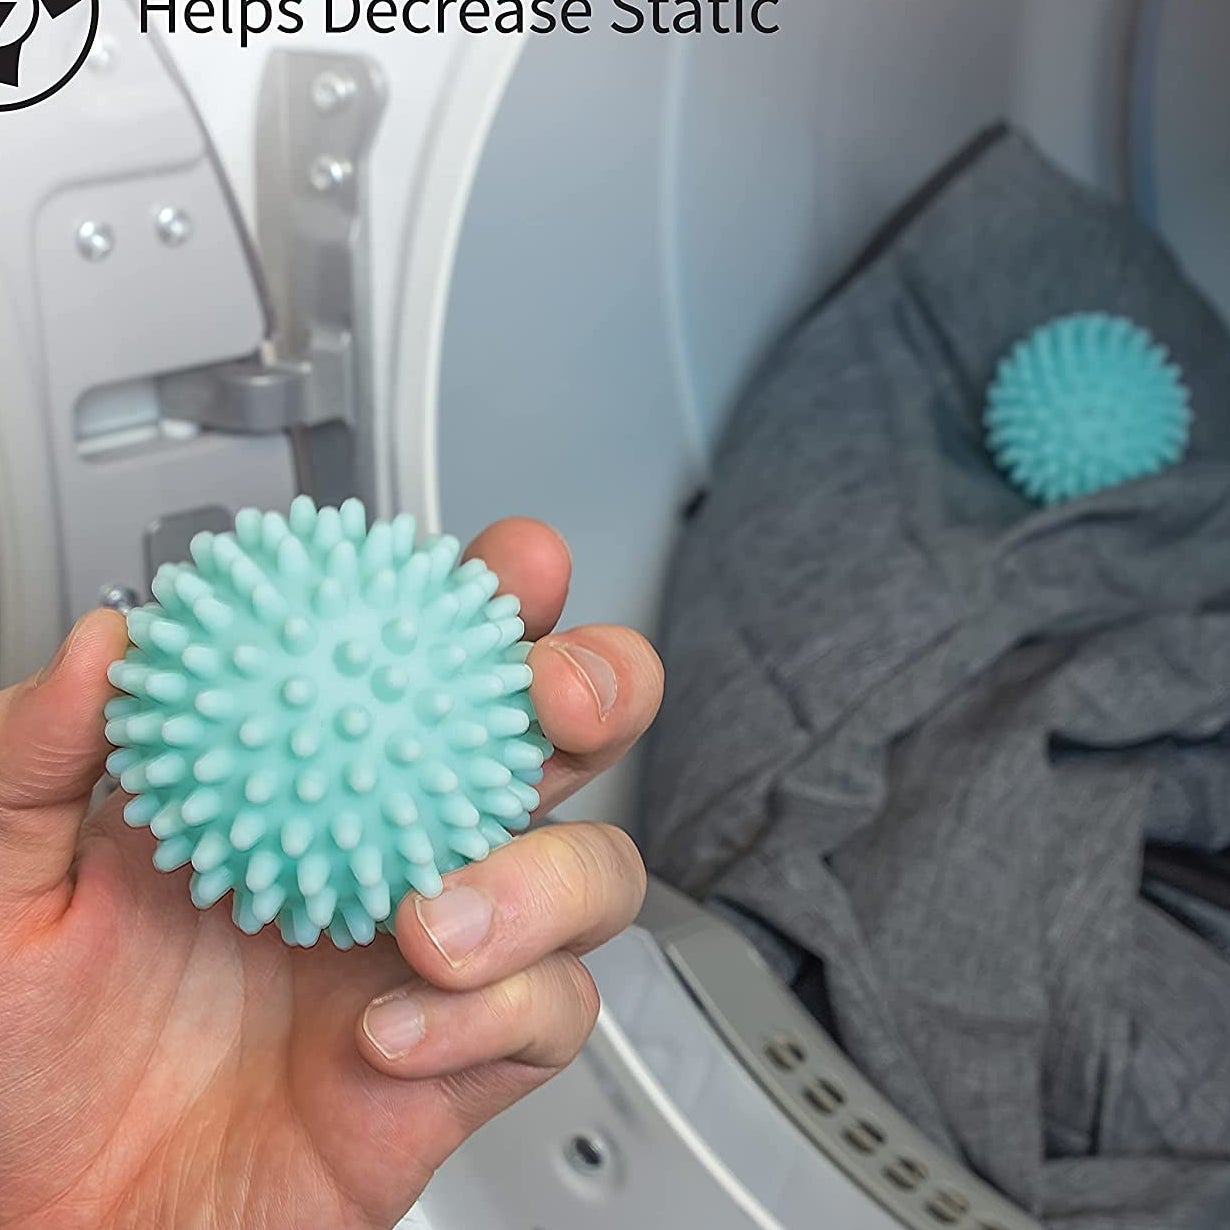 A person holding a dryer ball in front of a dryer